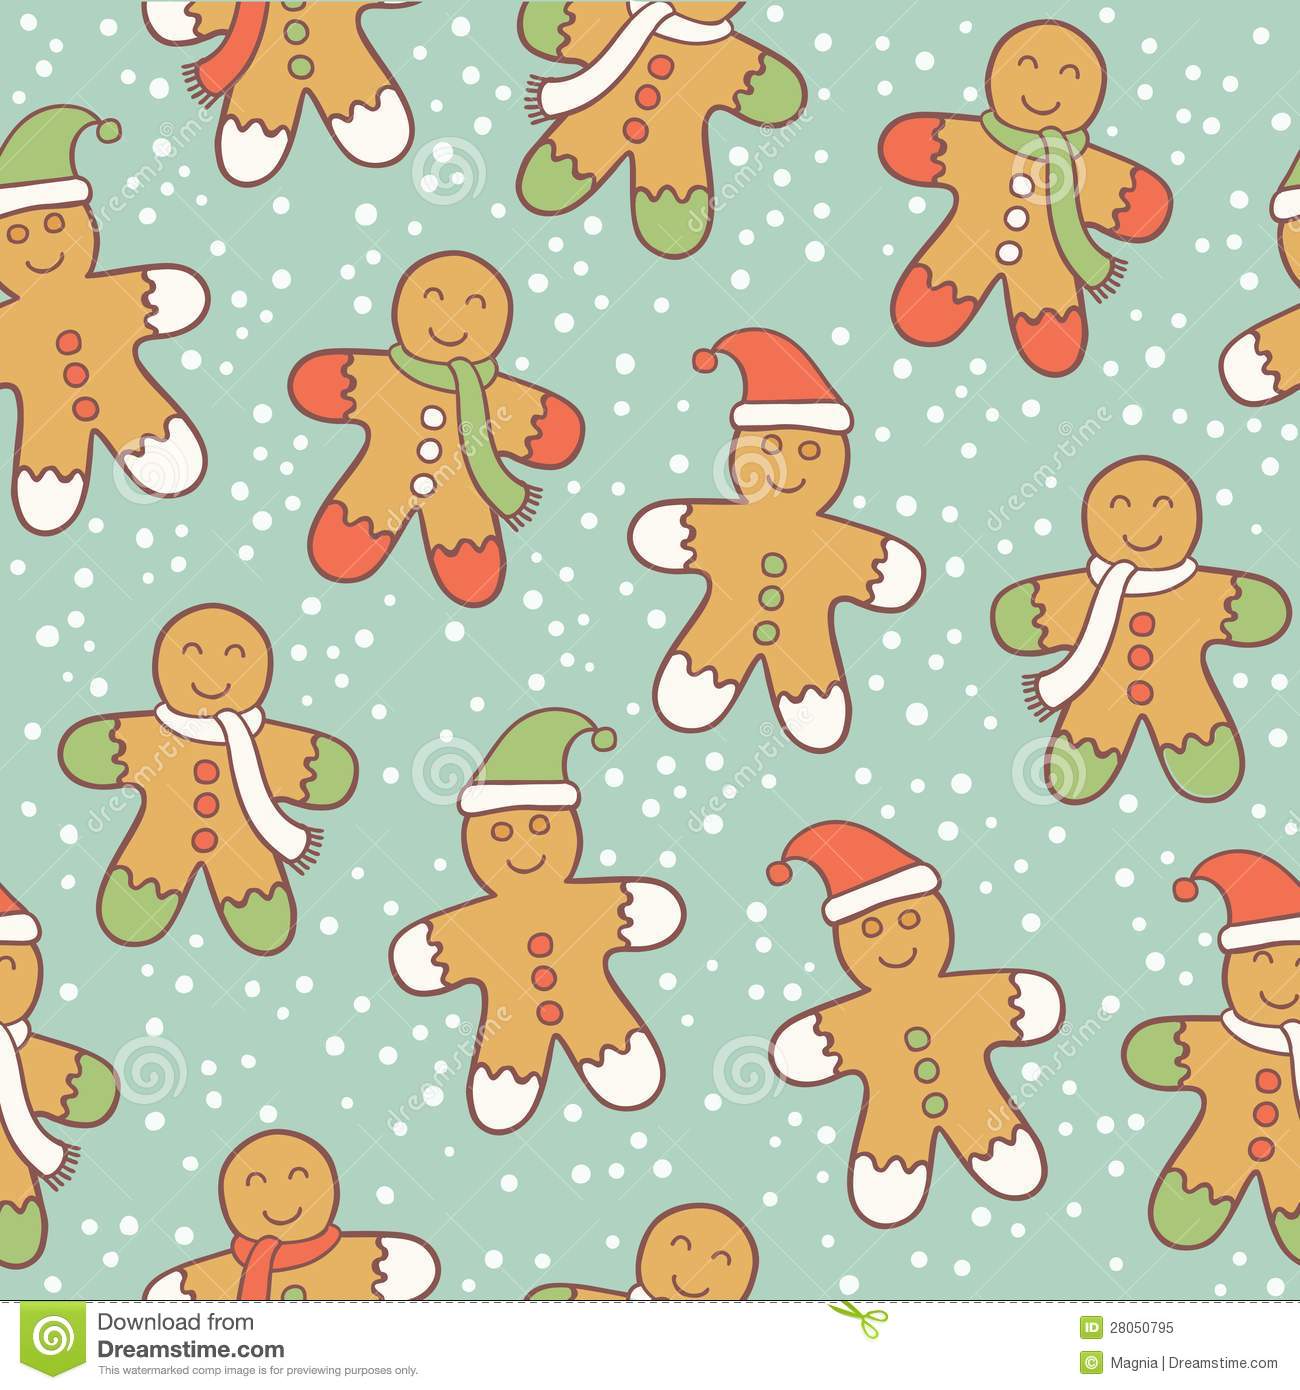 Featured image of post Cartoon Gingerbread Man Wallpaper Set of gingerbread men and gingerbread man faces